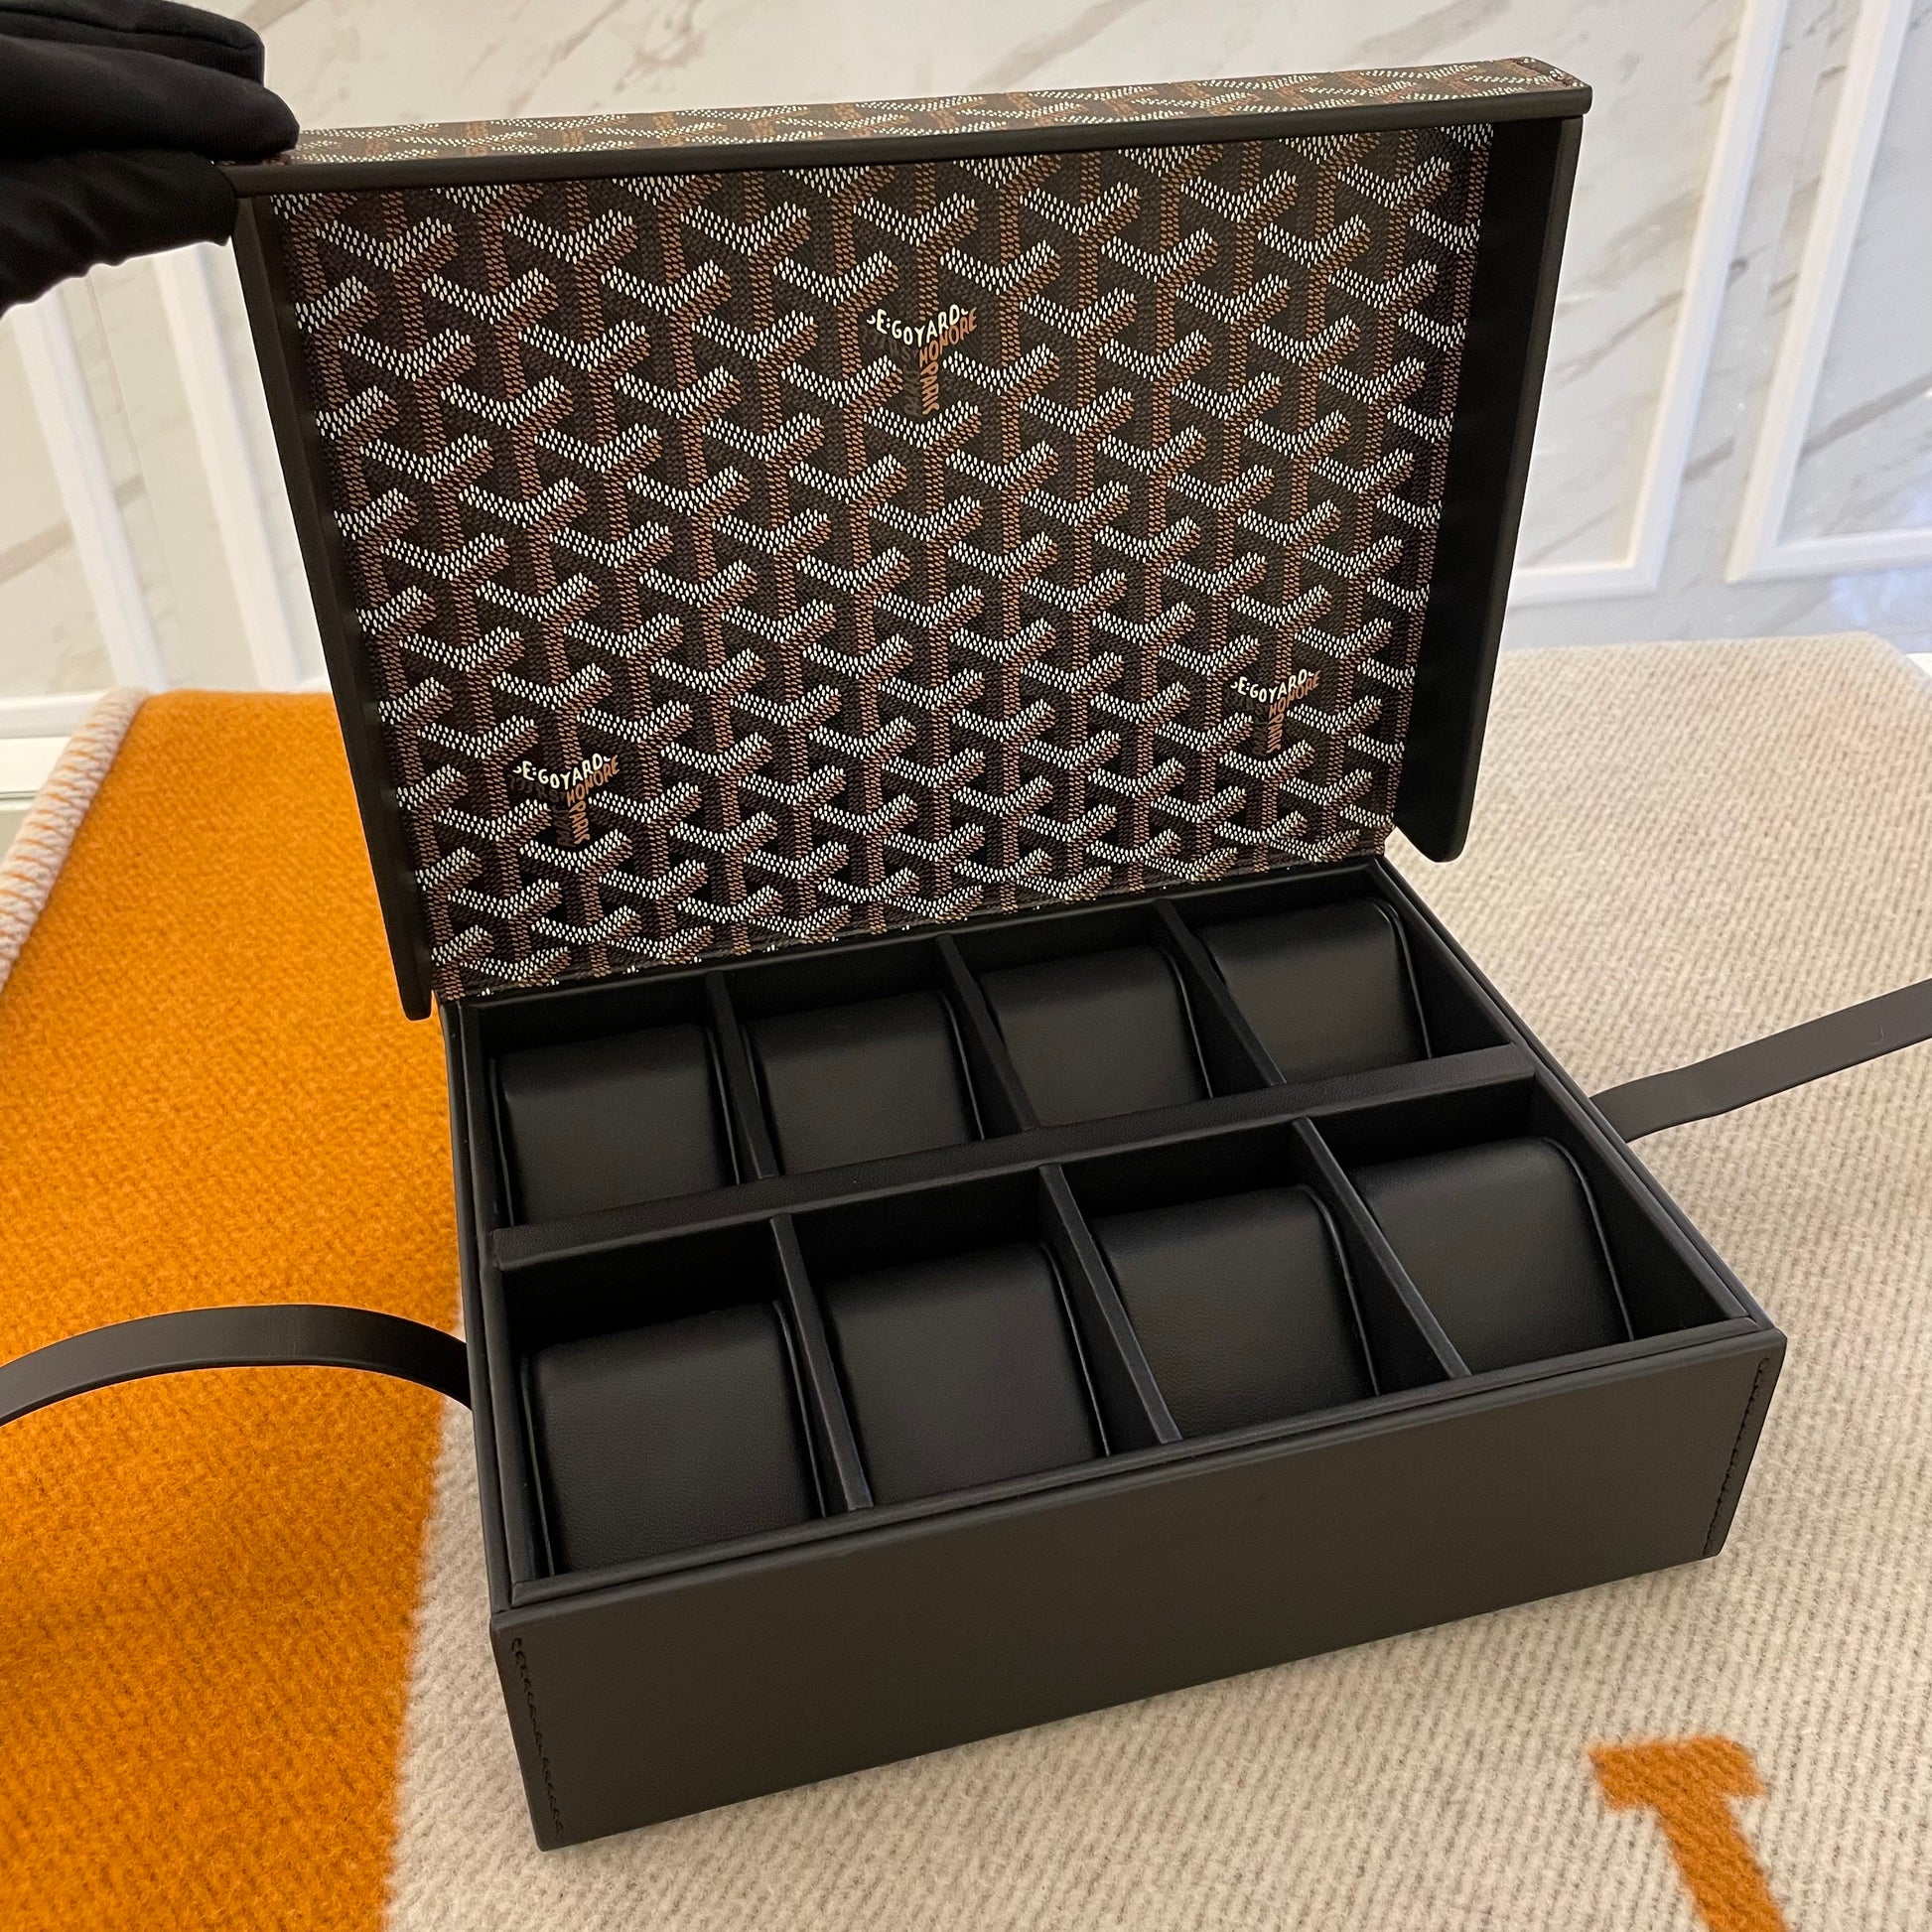 SOLD - Genuine Goyard Black Leather Watch Box for 8 Watches